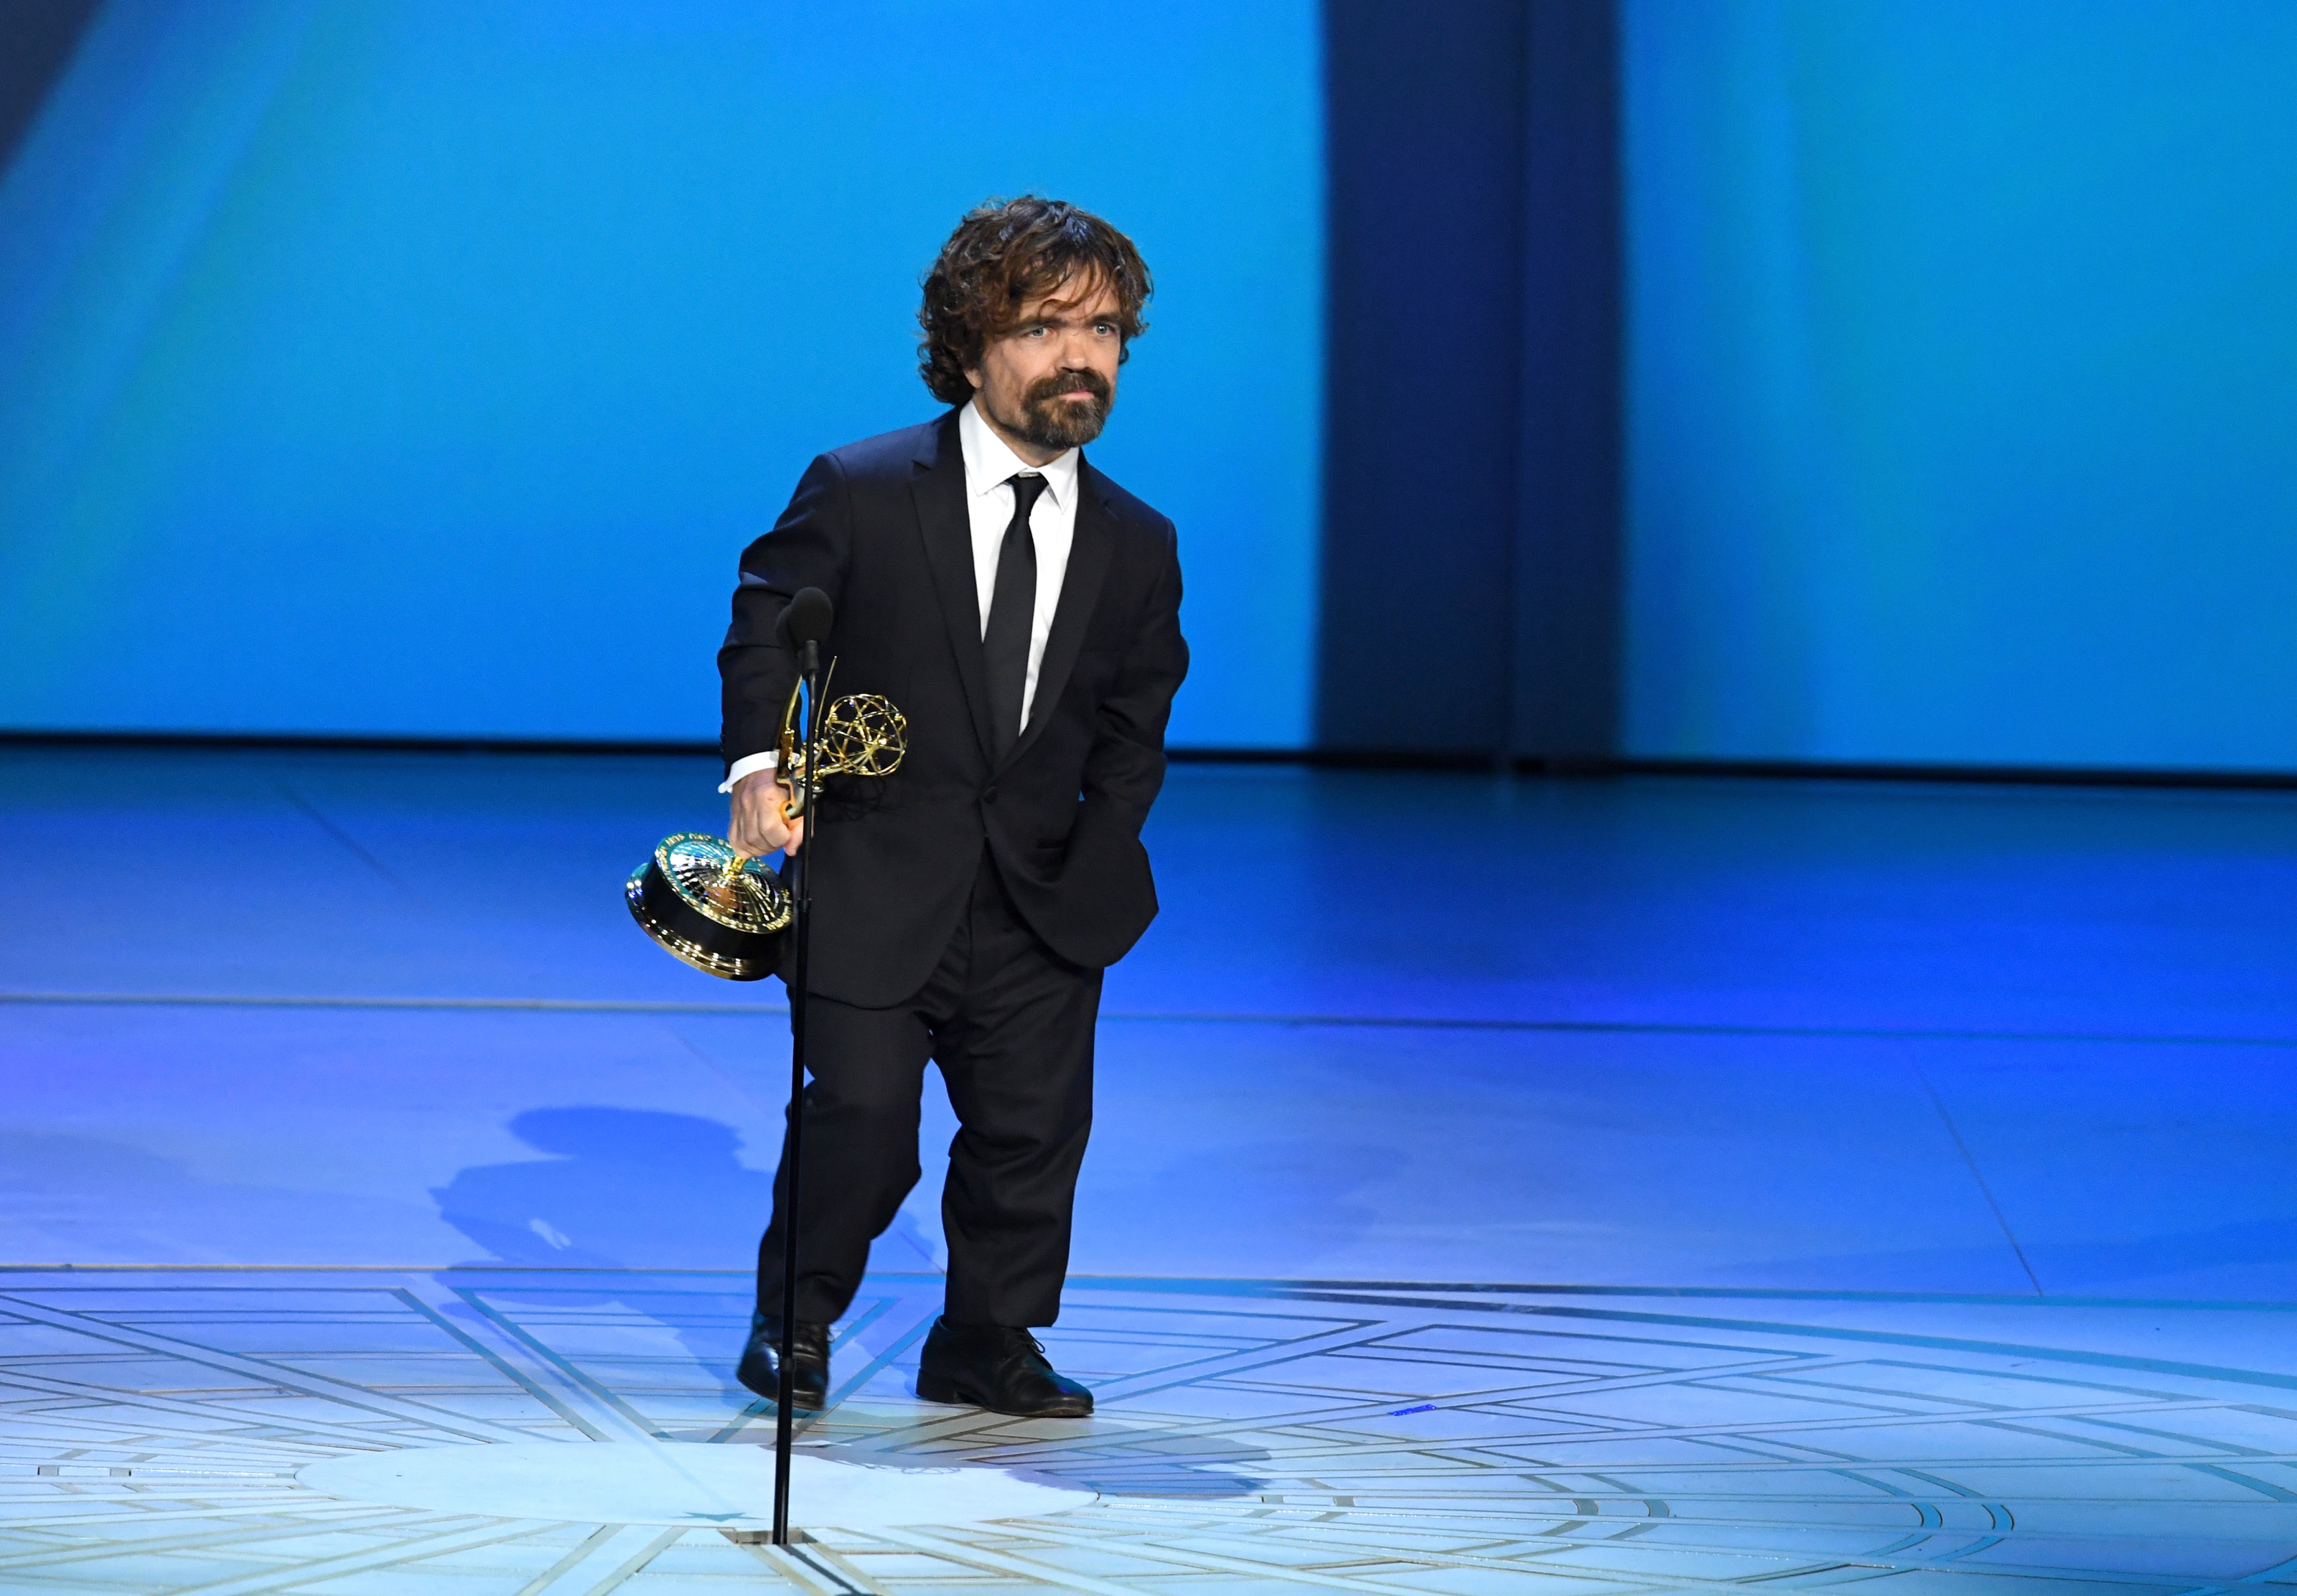 Peter-Dinklage-as-Tyrion-Lannister-raising-a-glass-on-Game-of